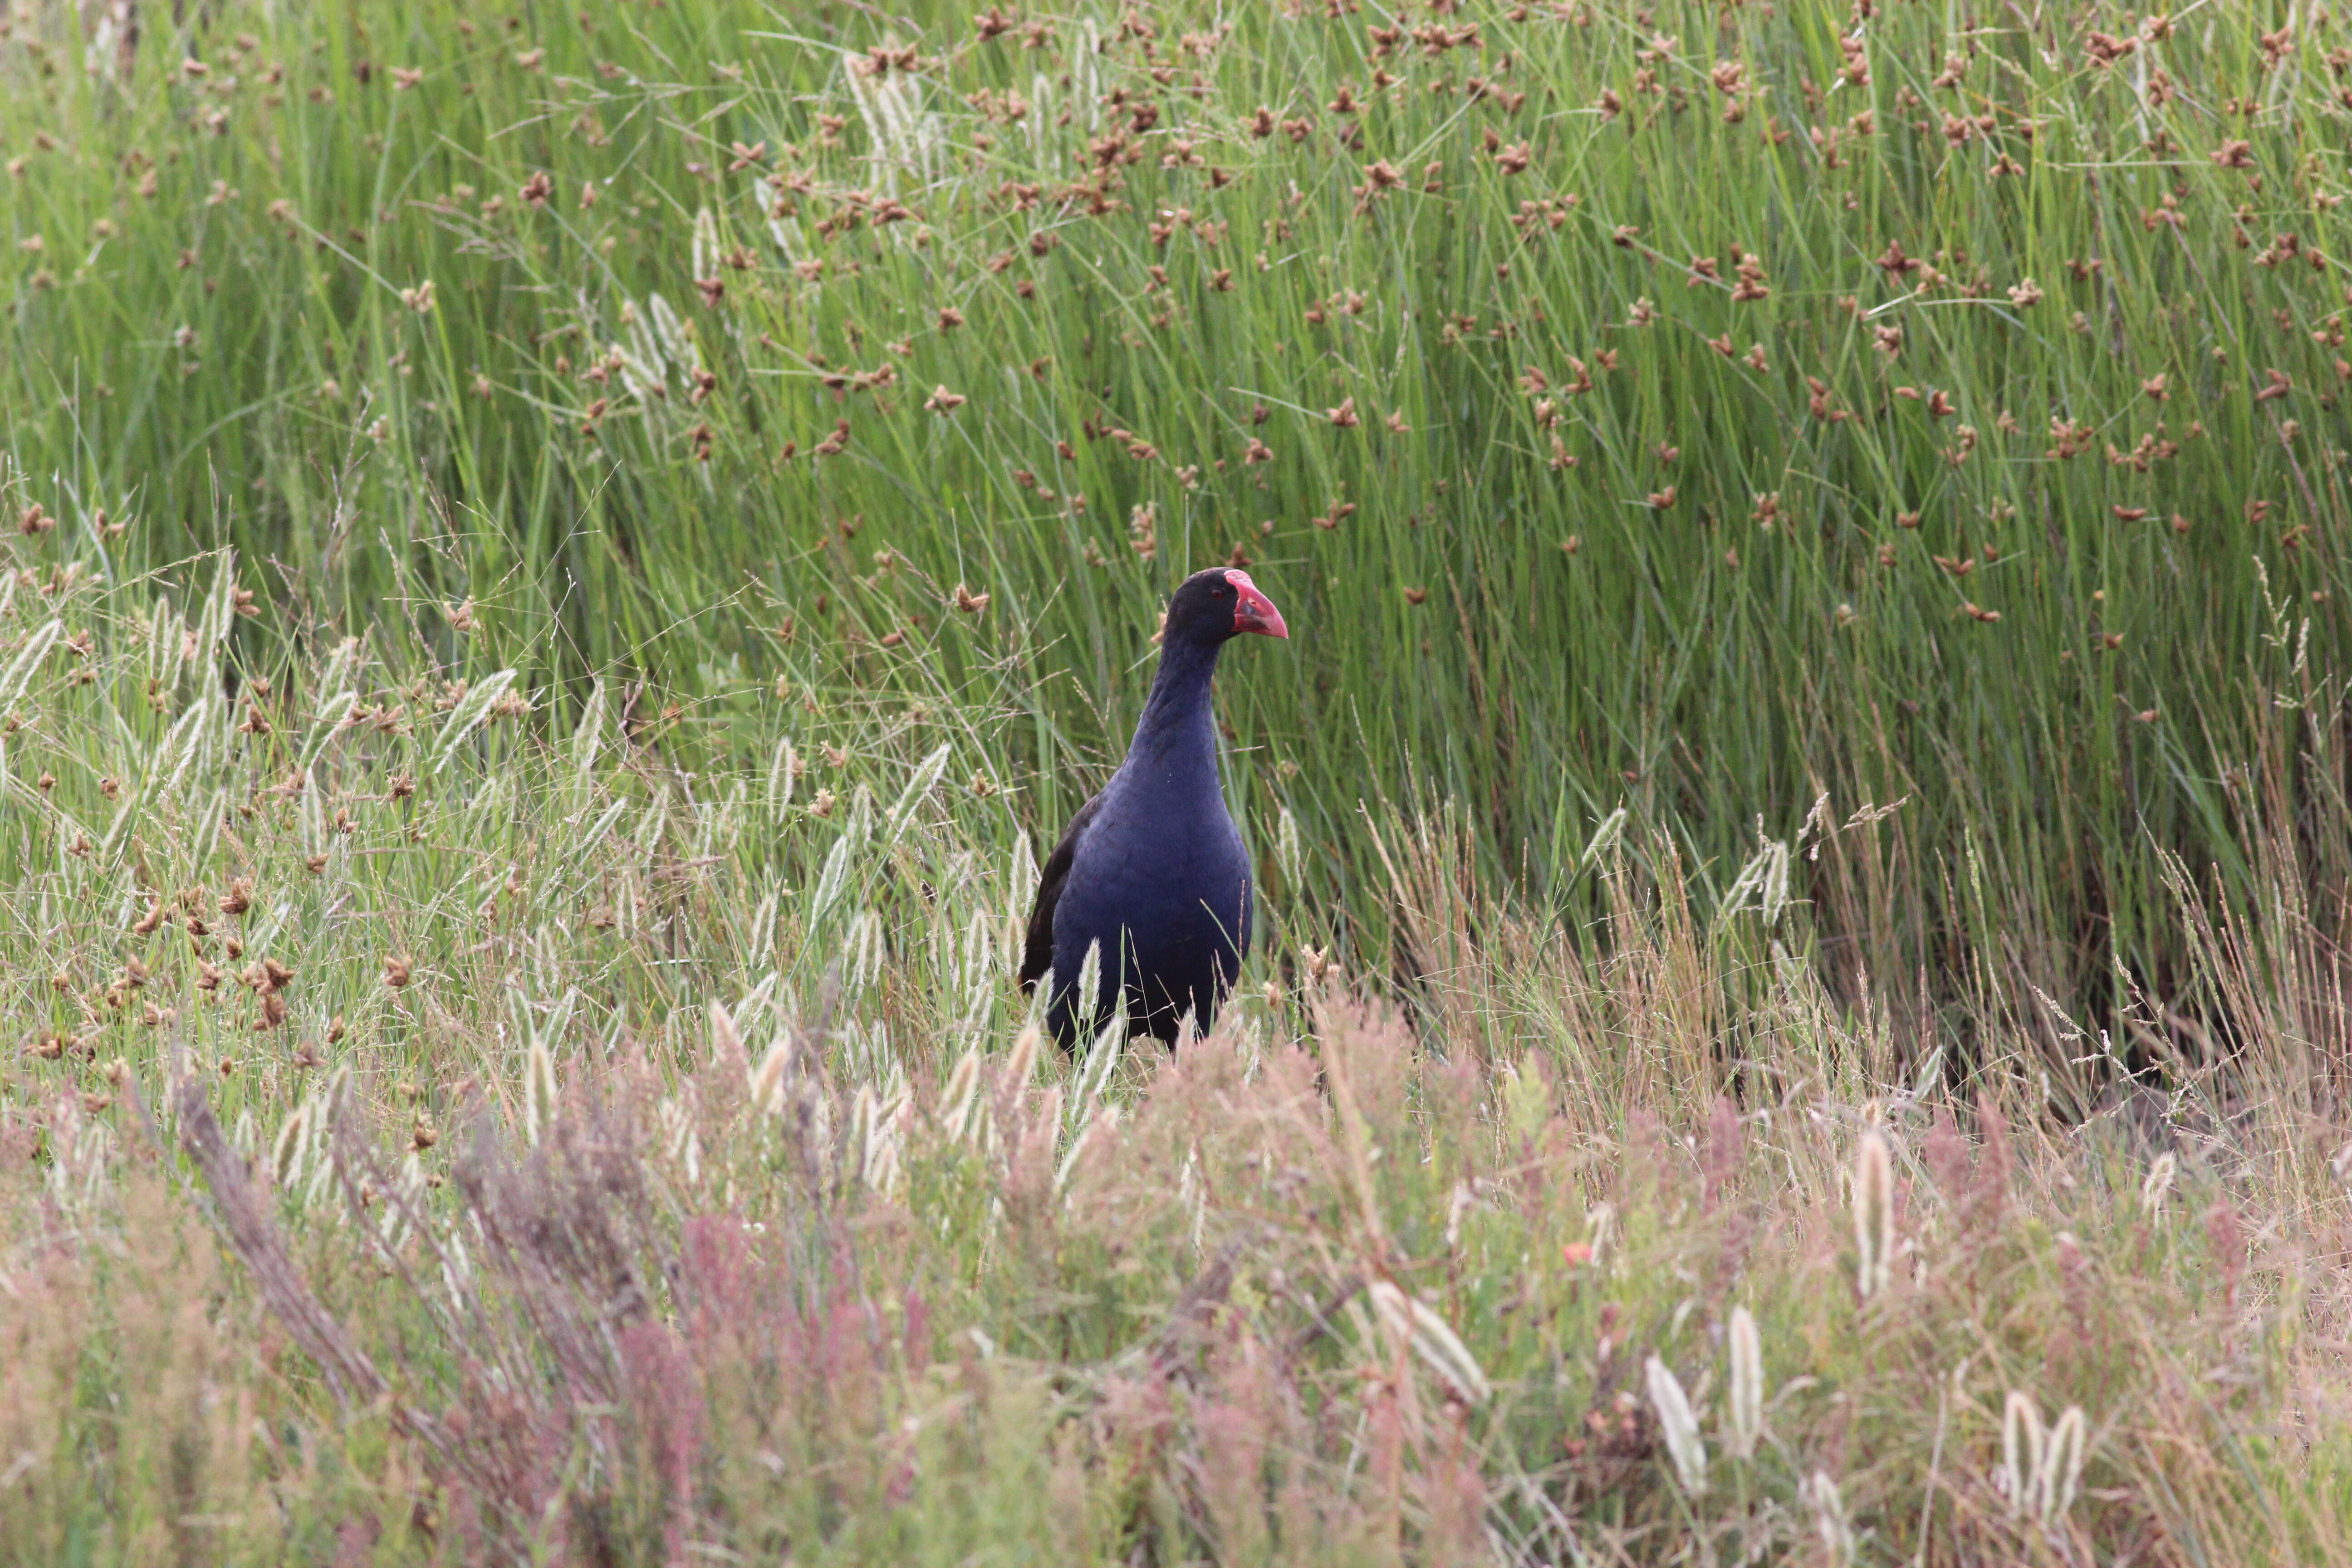 Image of Swamphen